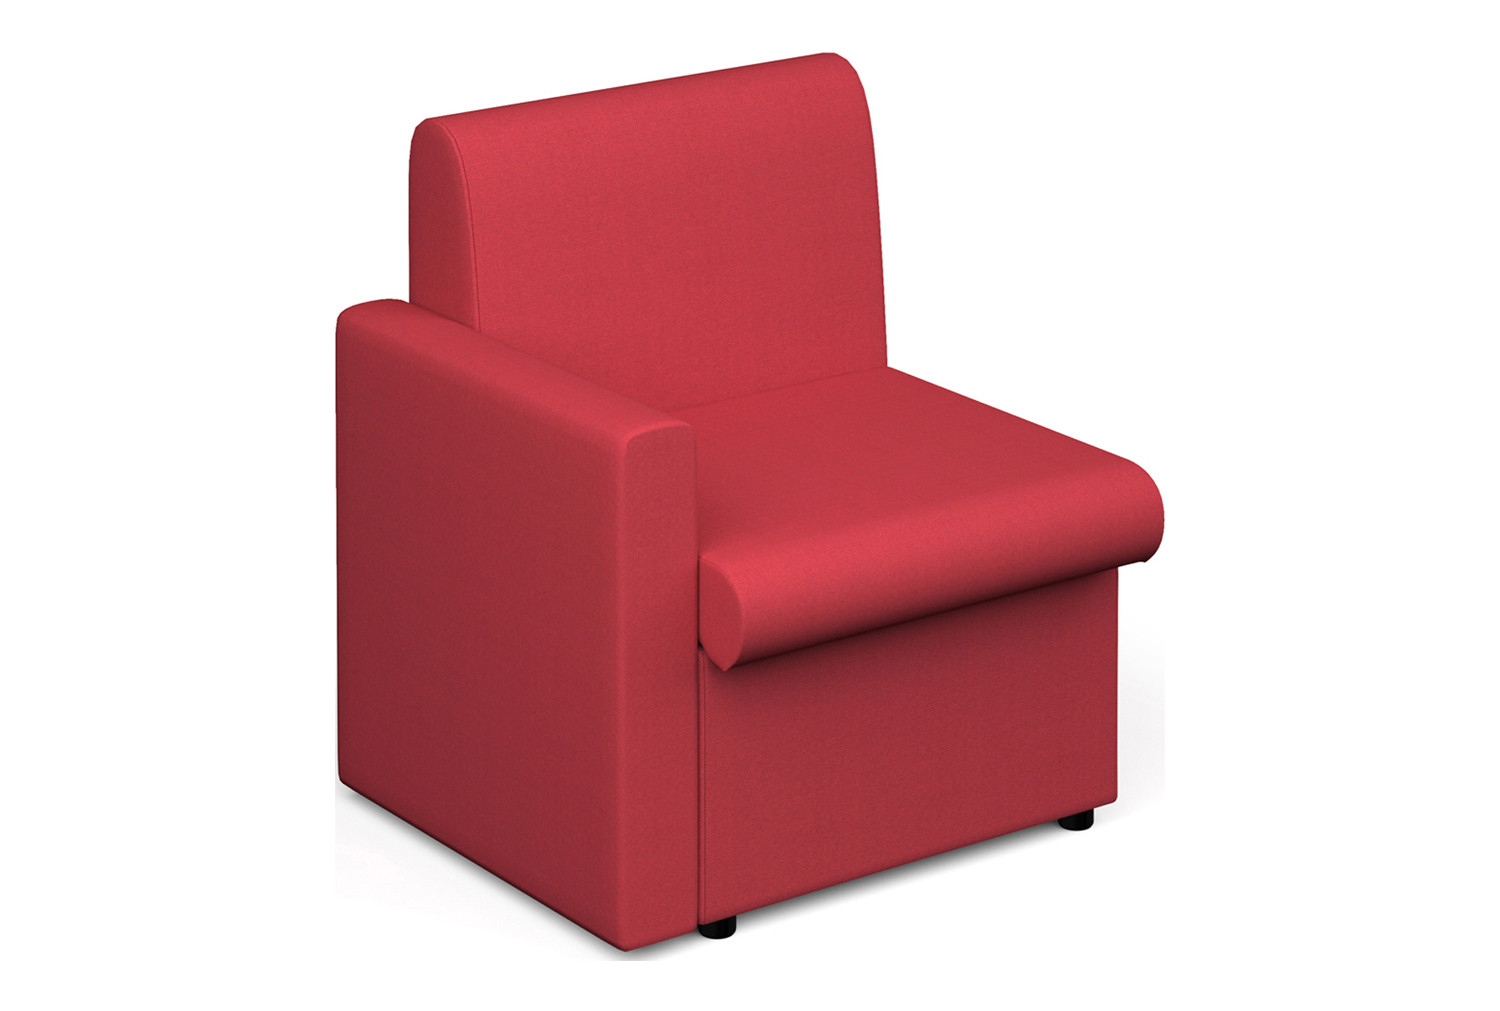 Portland Modular Soft Seating, Chair With Right Arm, Forecast